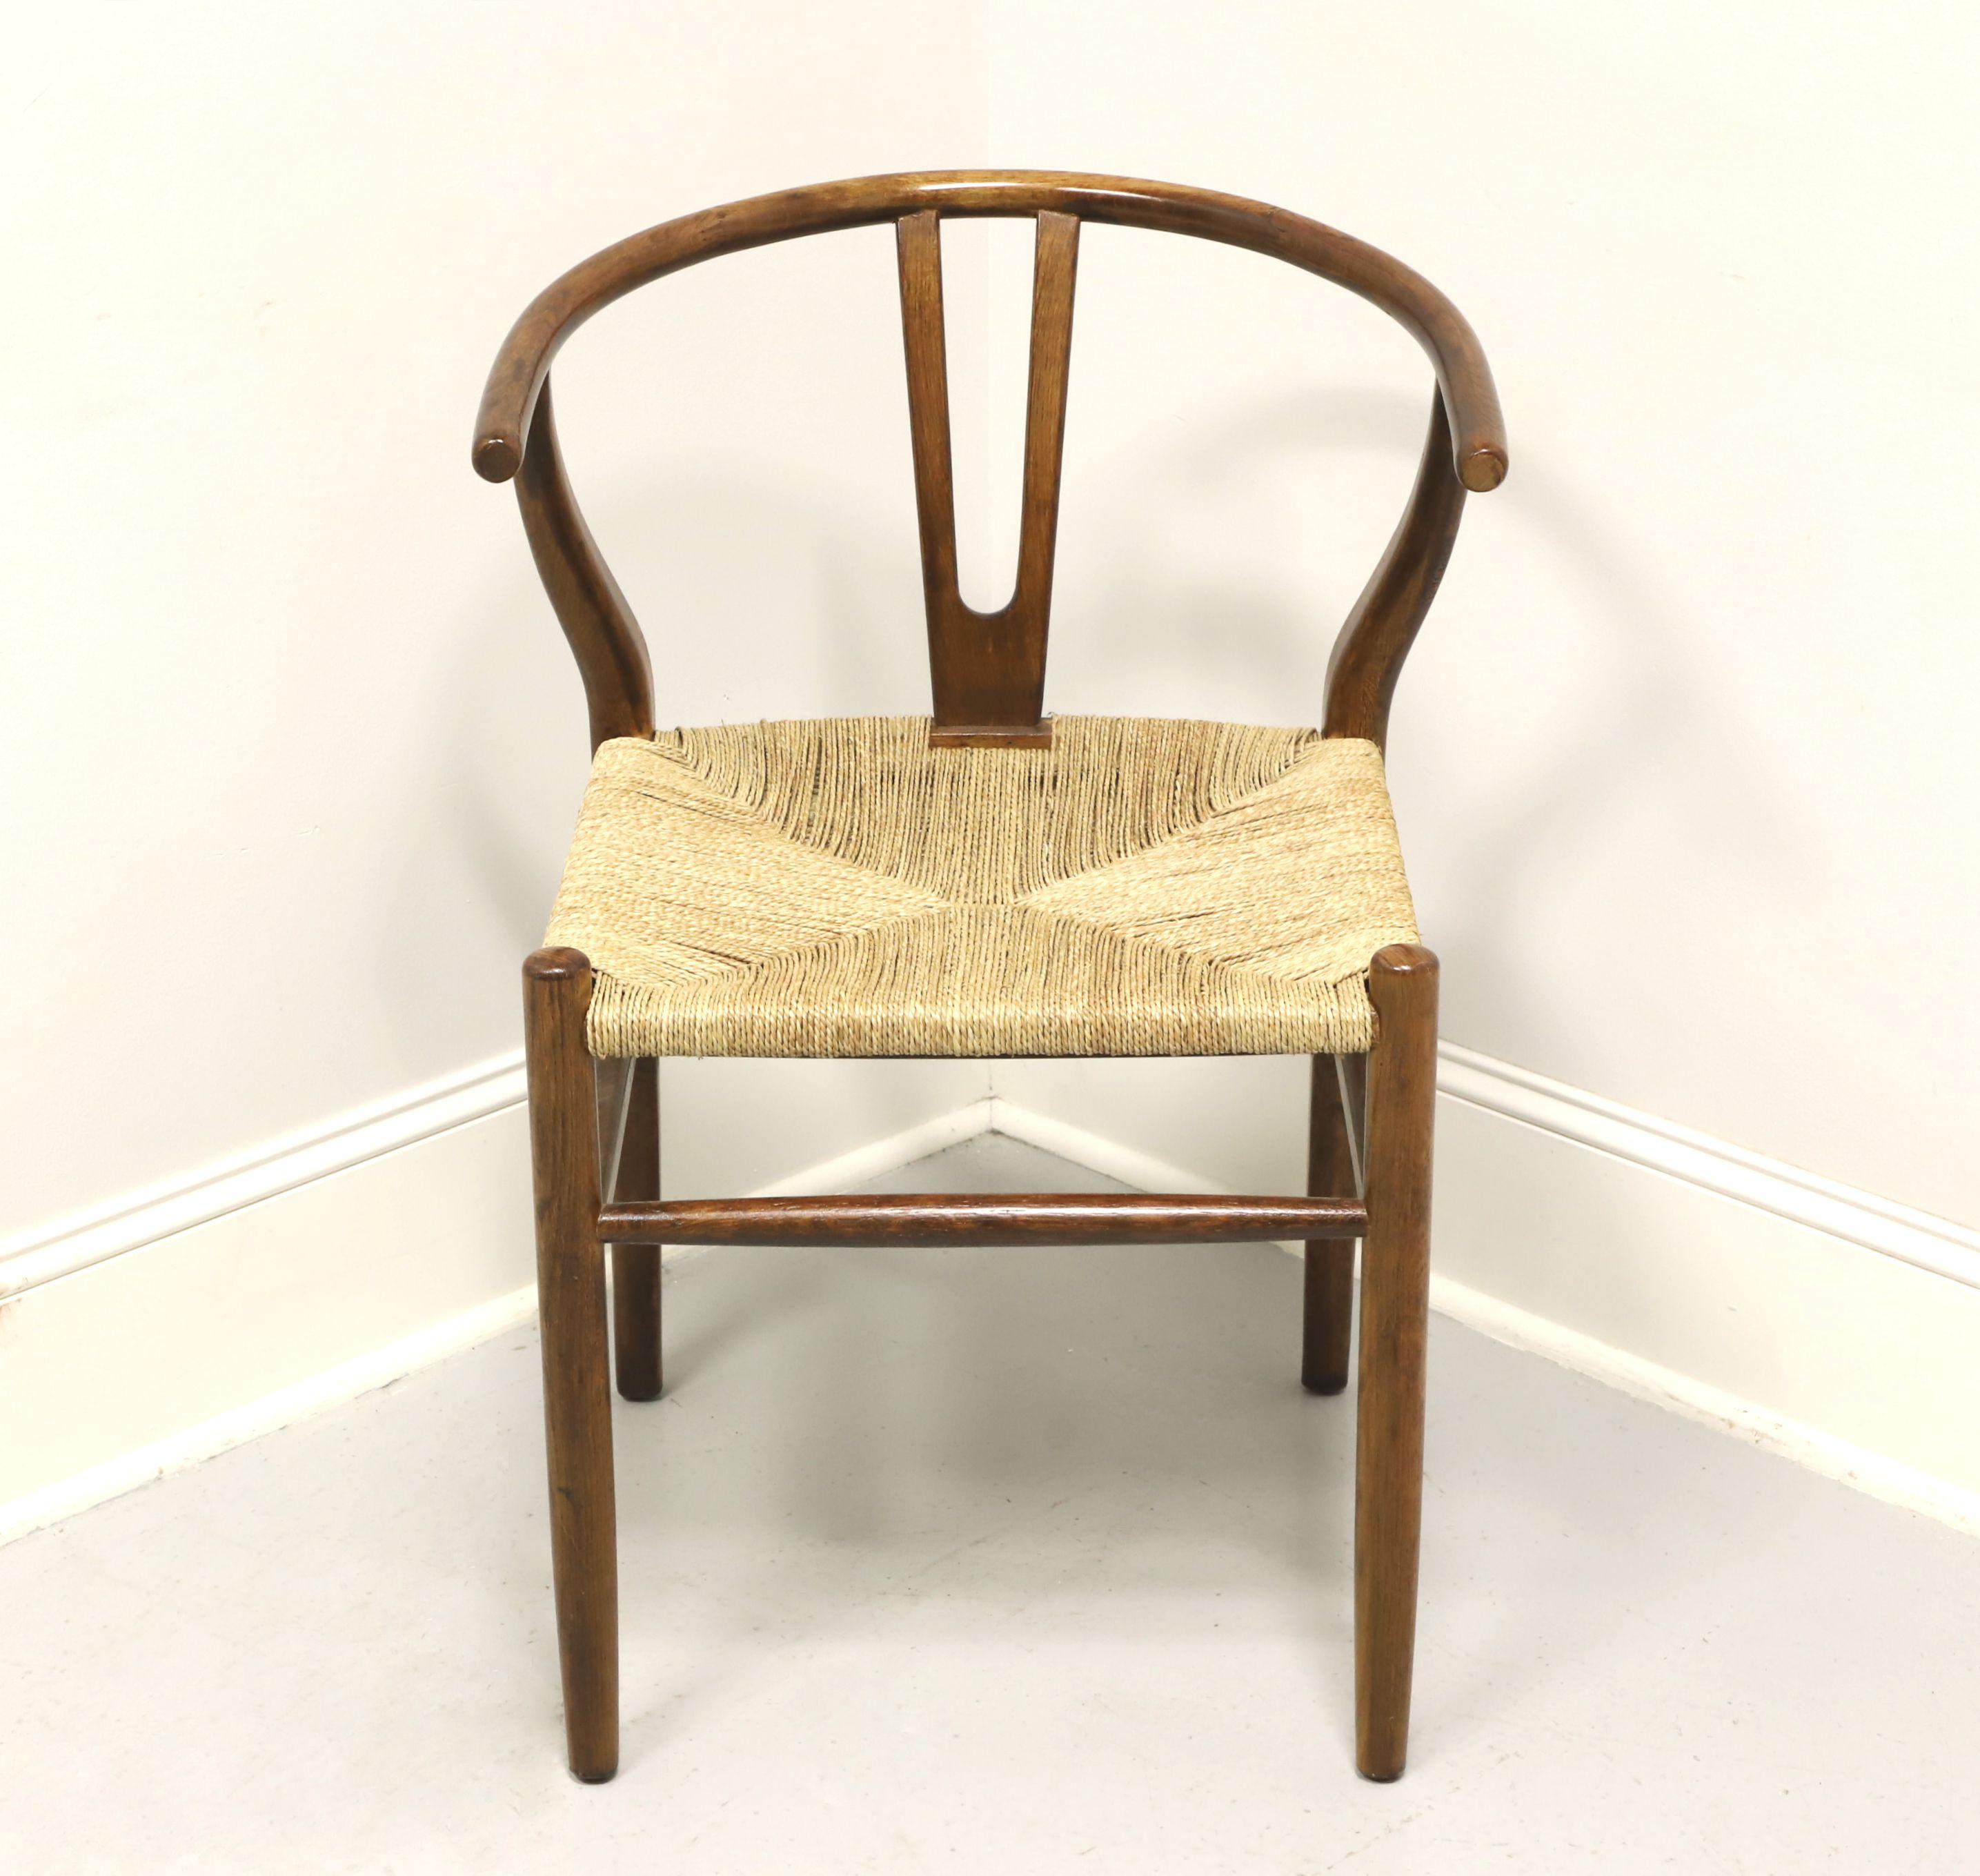 A Chinese Ming style armchair, unbranded. Solid oak with a chestnut color finish, slender curved arms that form the crest rail, 